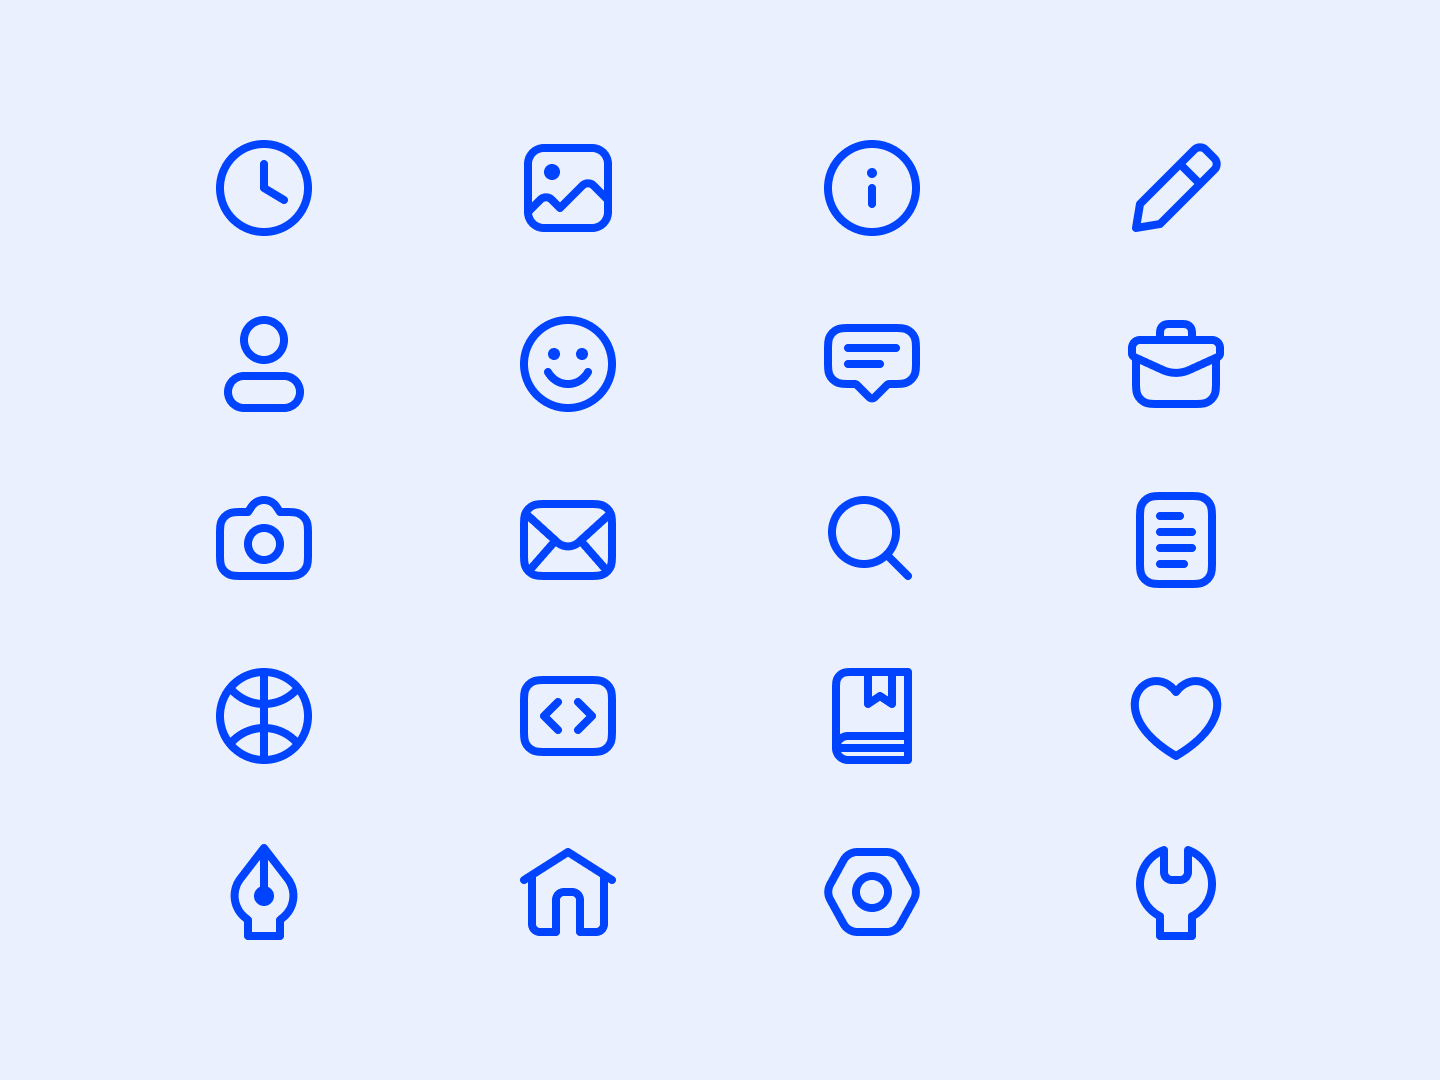 The line version of my website icons